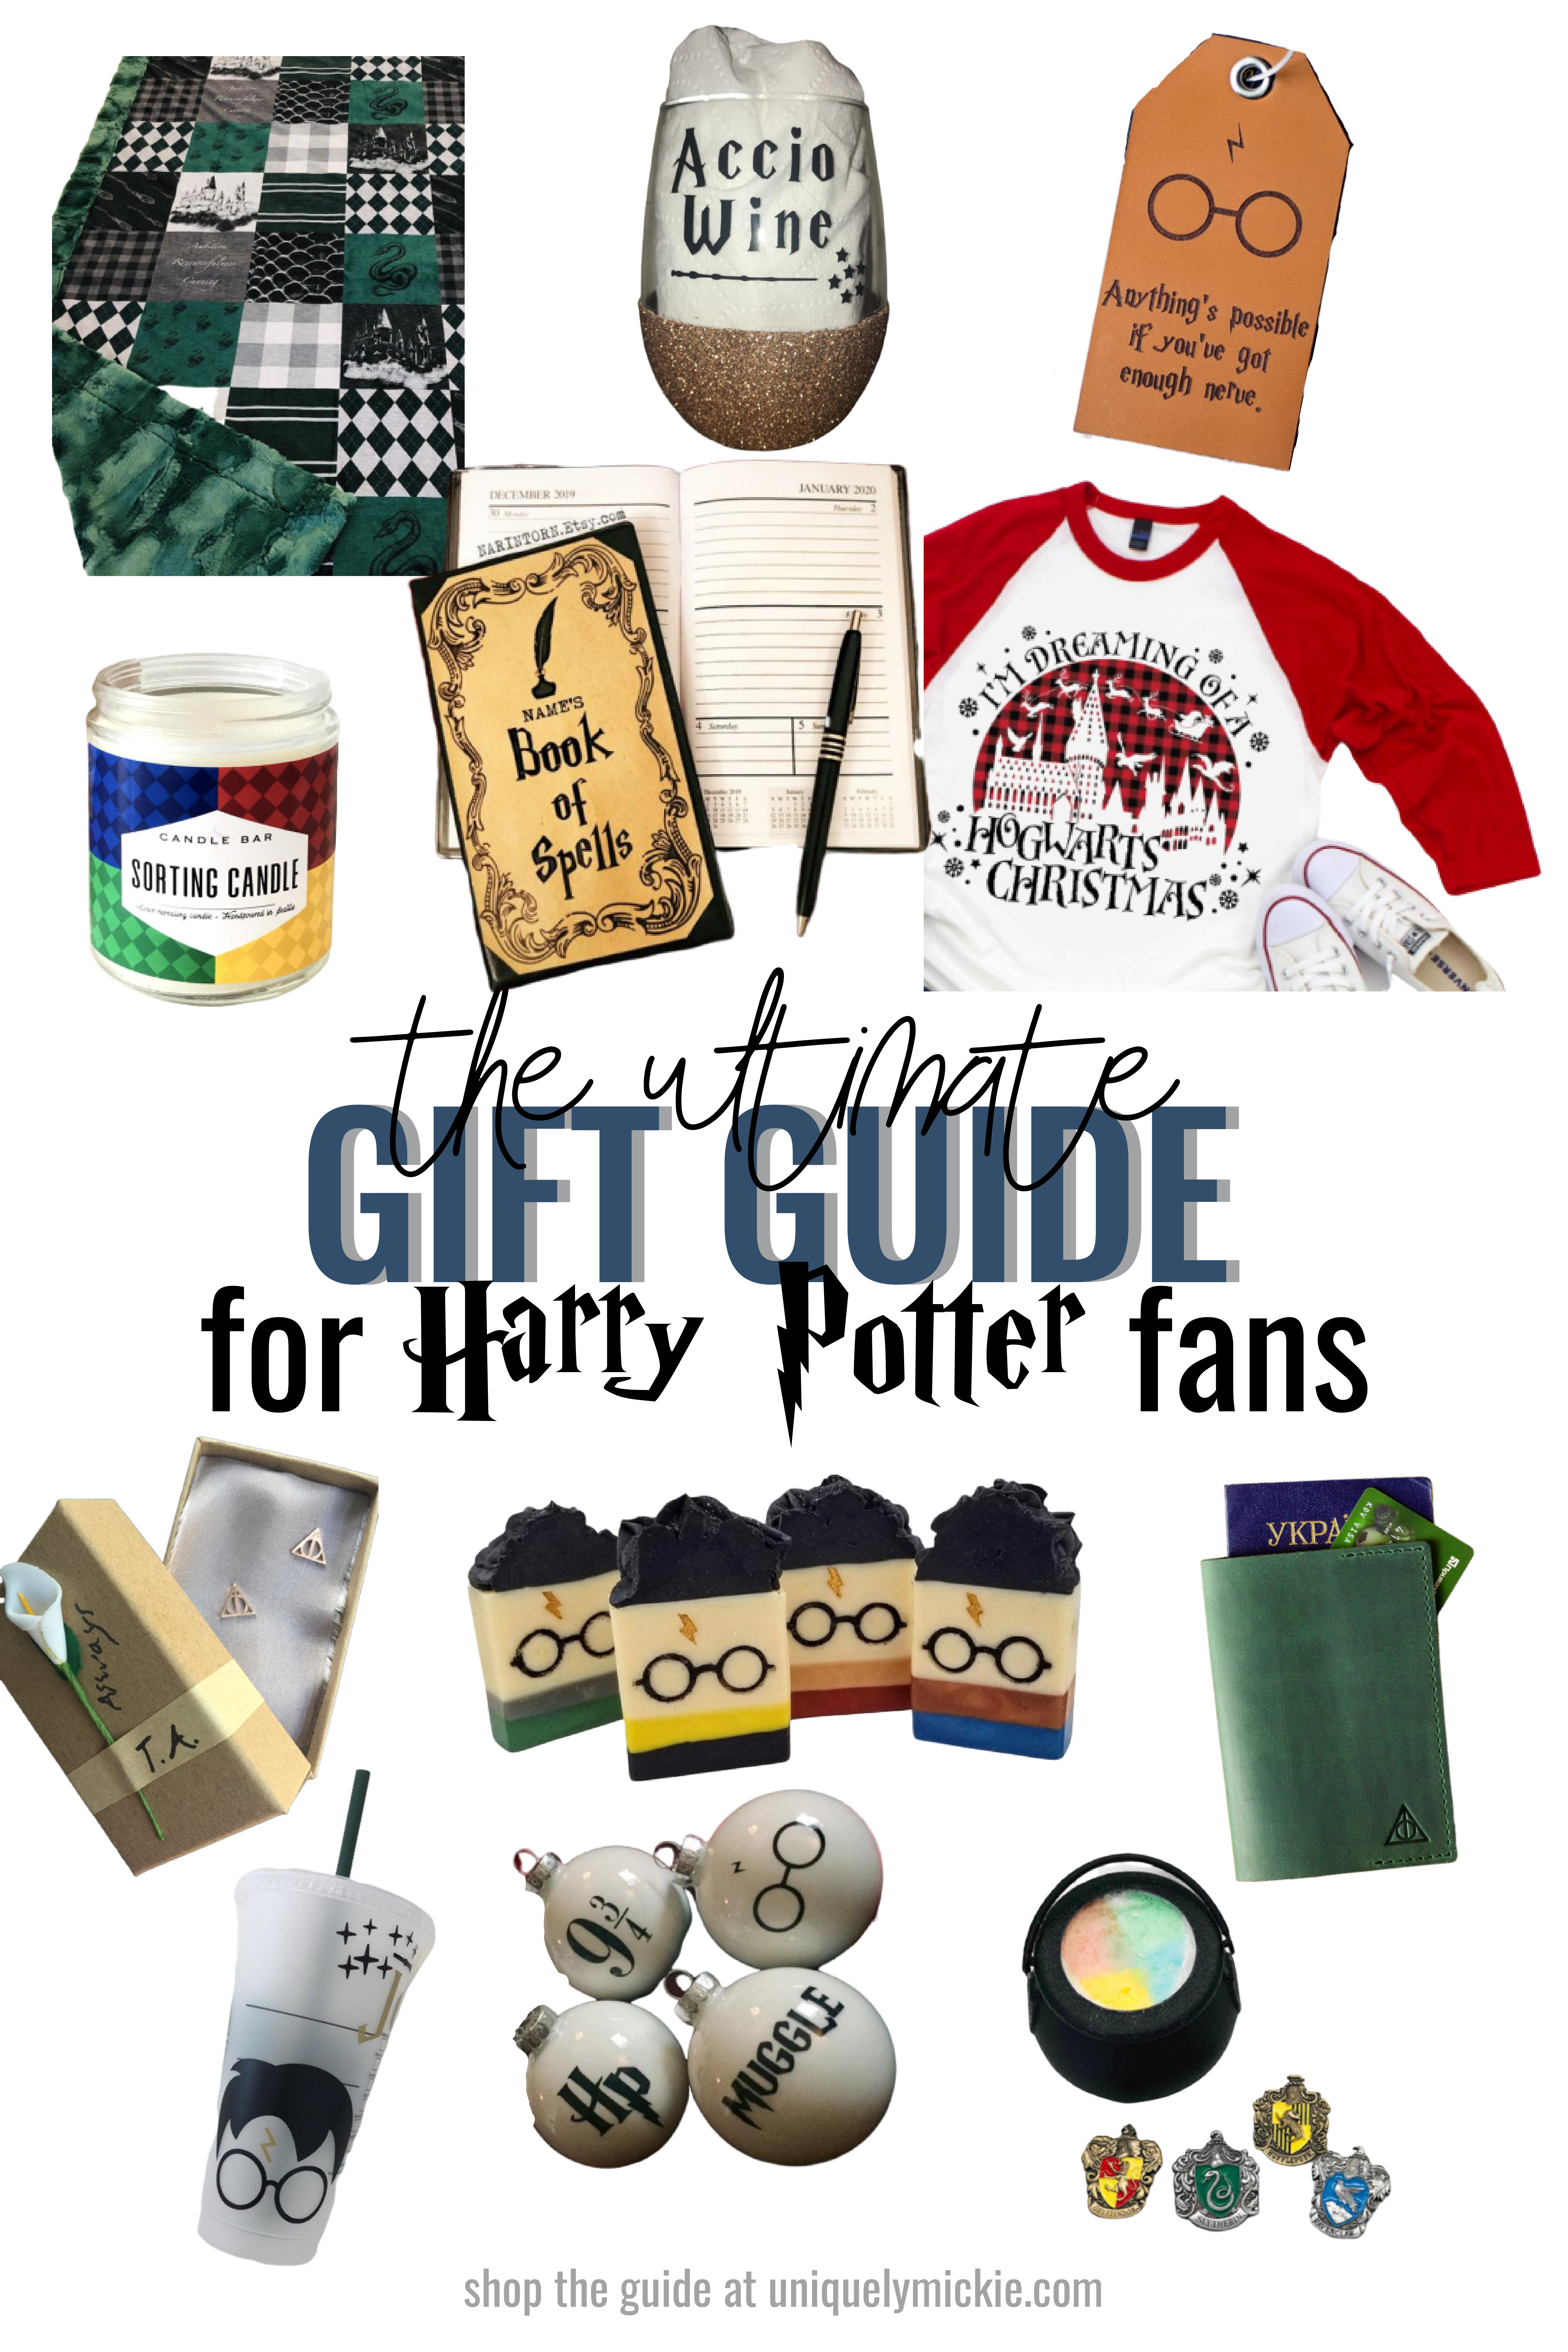 14 Harry Potter Inspired  Finds That'll Make Perfect Gifts